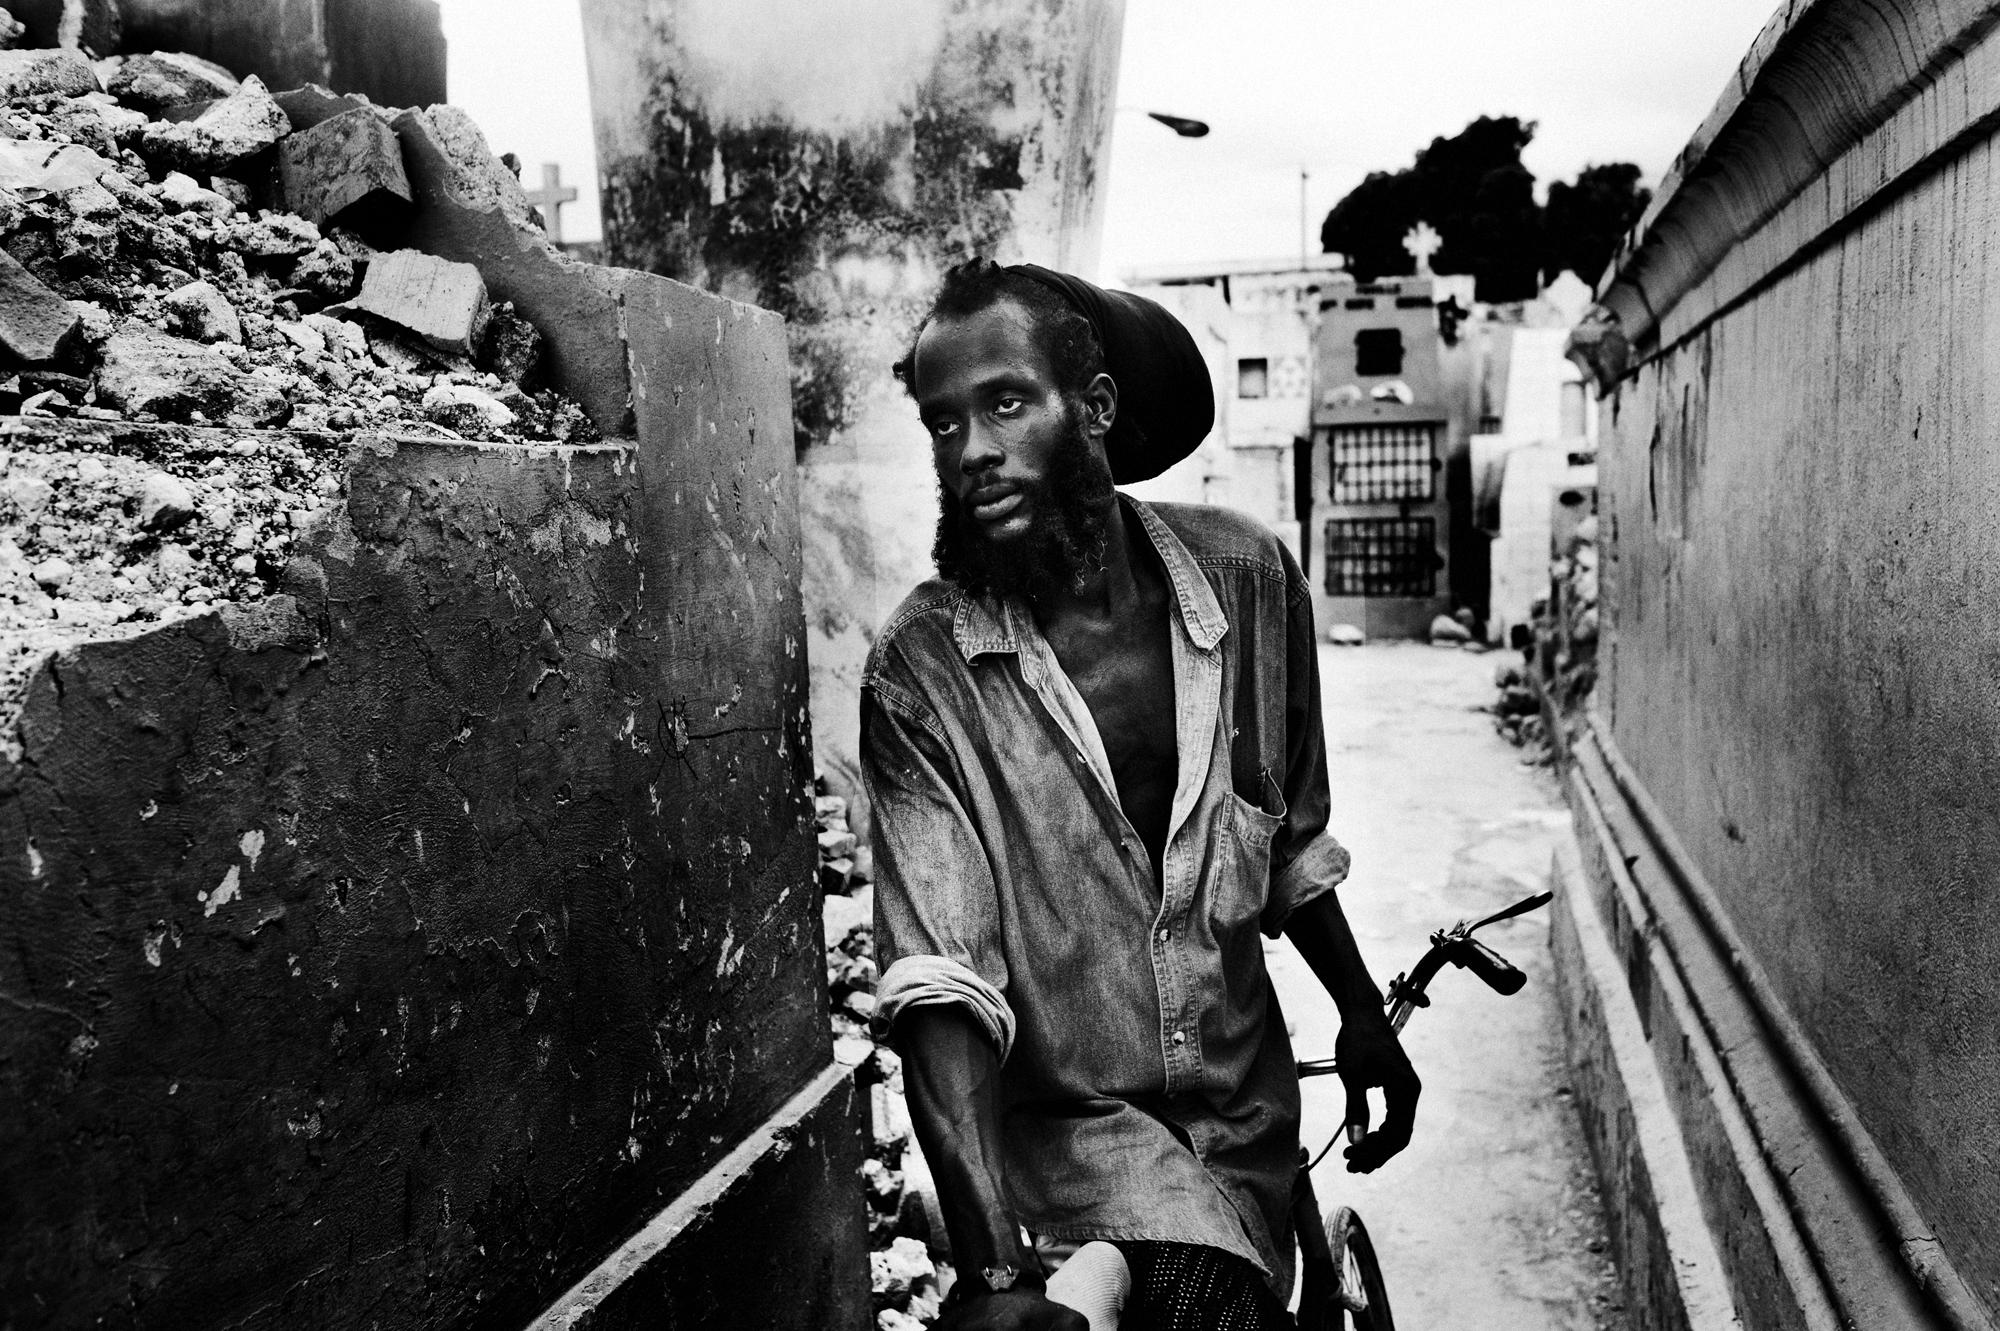 Private hell - Port au Prince.June 2010.A man standing next to the...